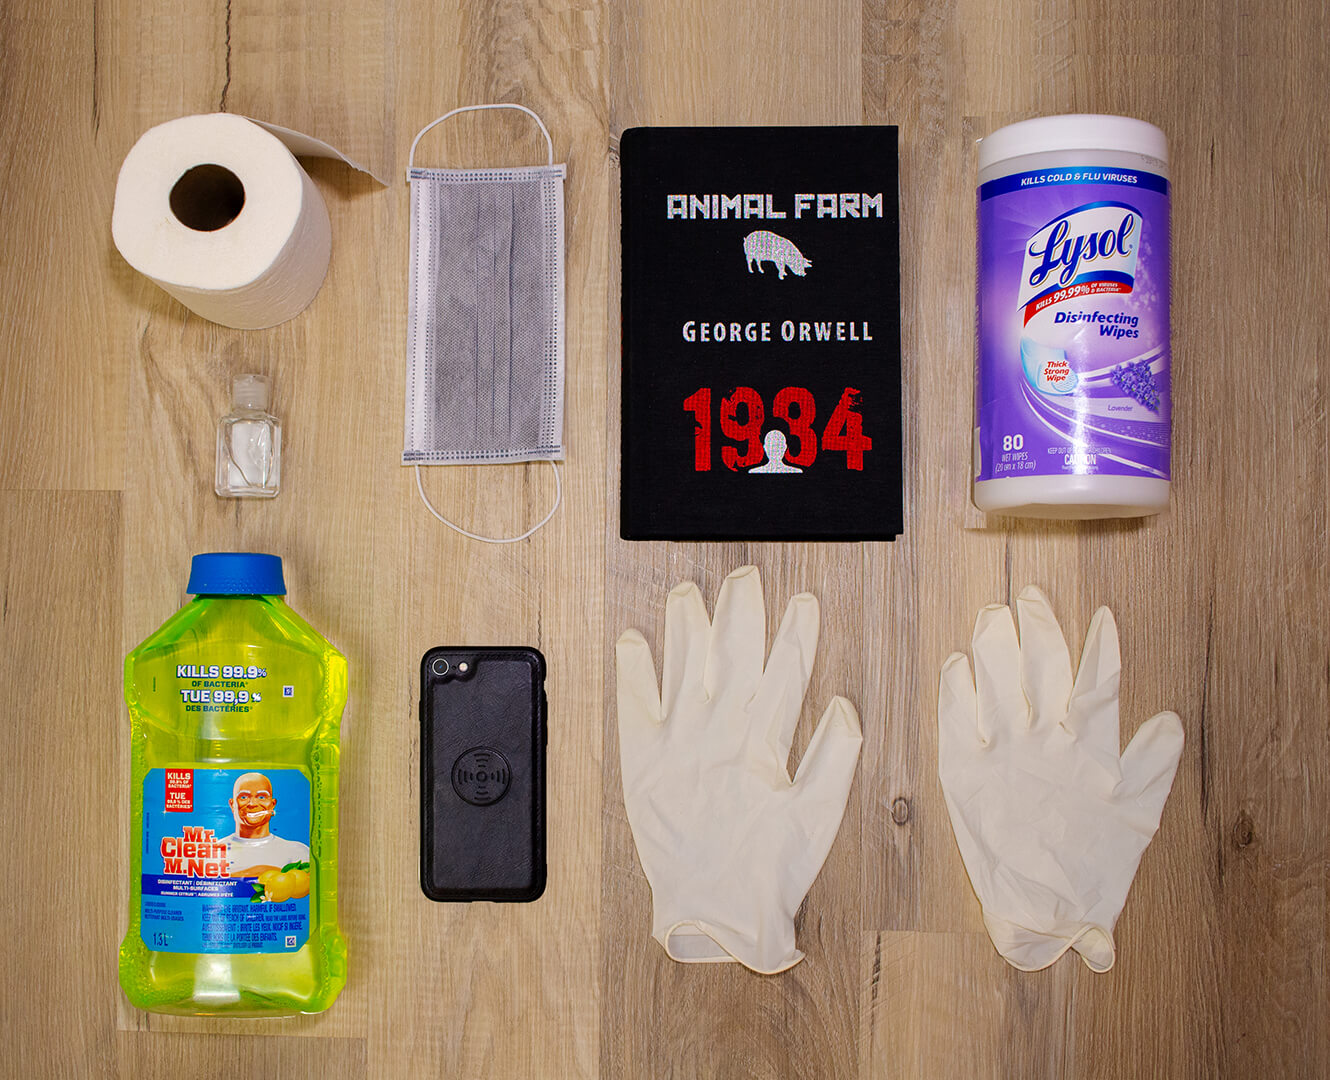 George orwell 1984 toilet paper gloves hand sanitizer cleaner lysol wipes